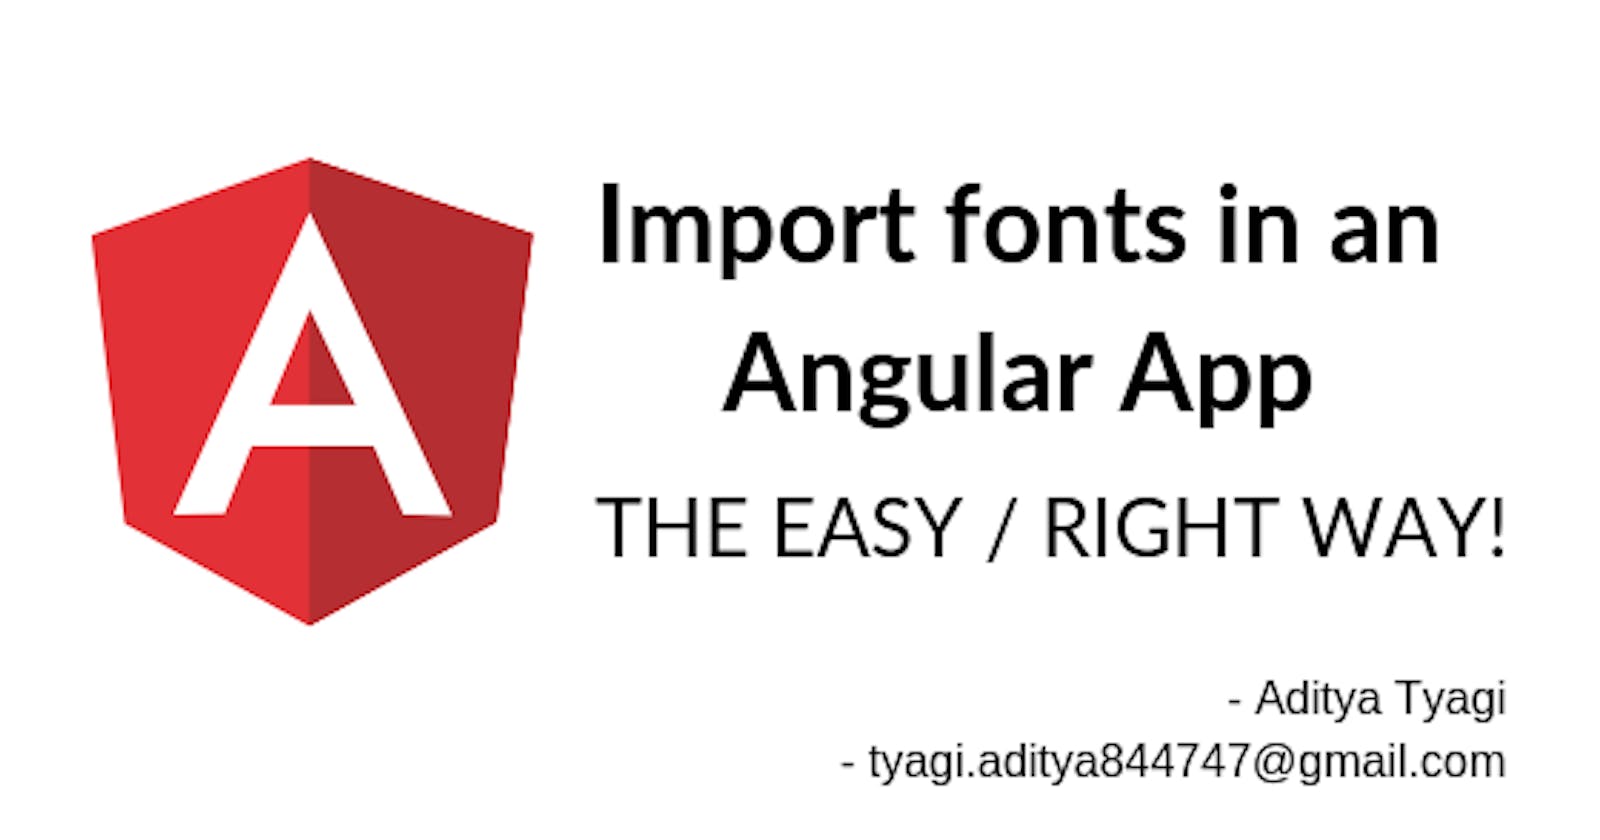 Import fonts in an Angular App - THE EASY / RIGHT WAY!